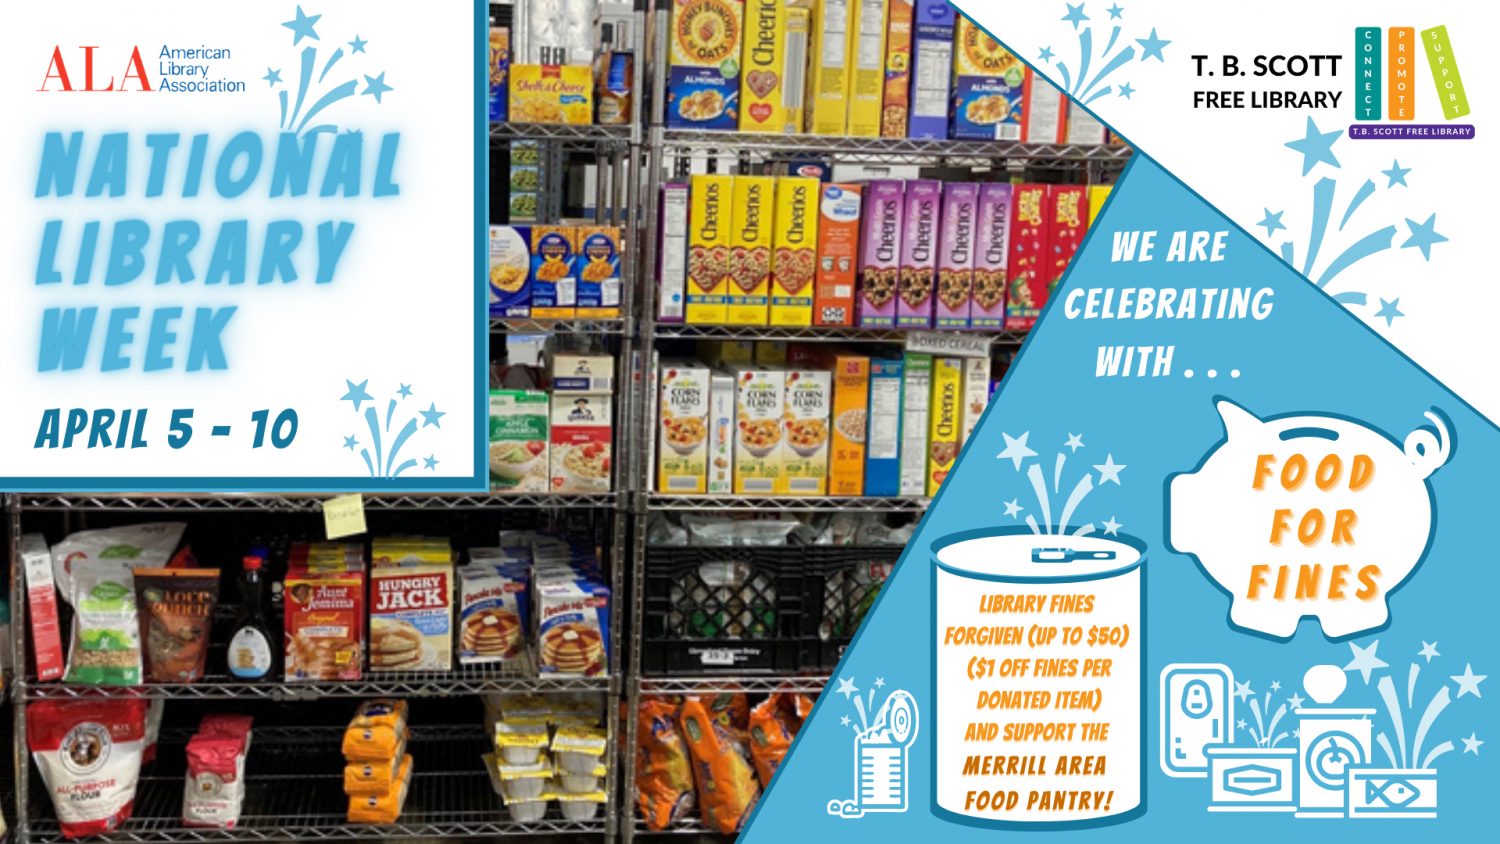 Food for Fines in celebration of National Library Week: April 4-10